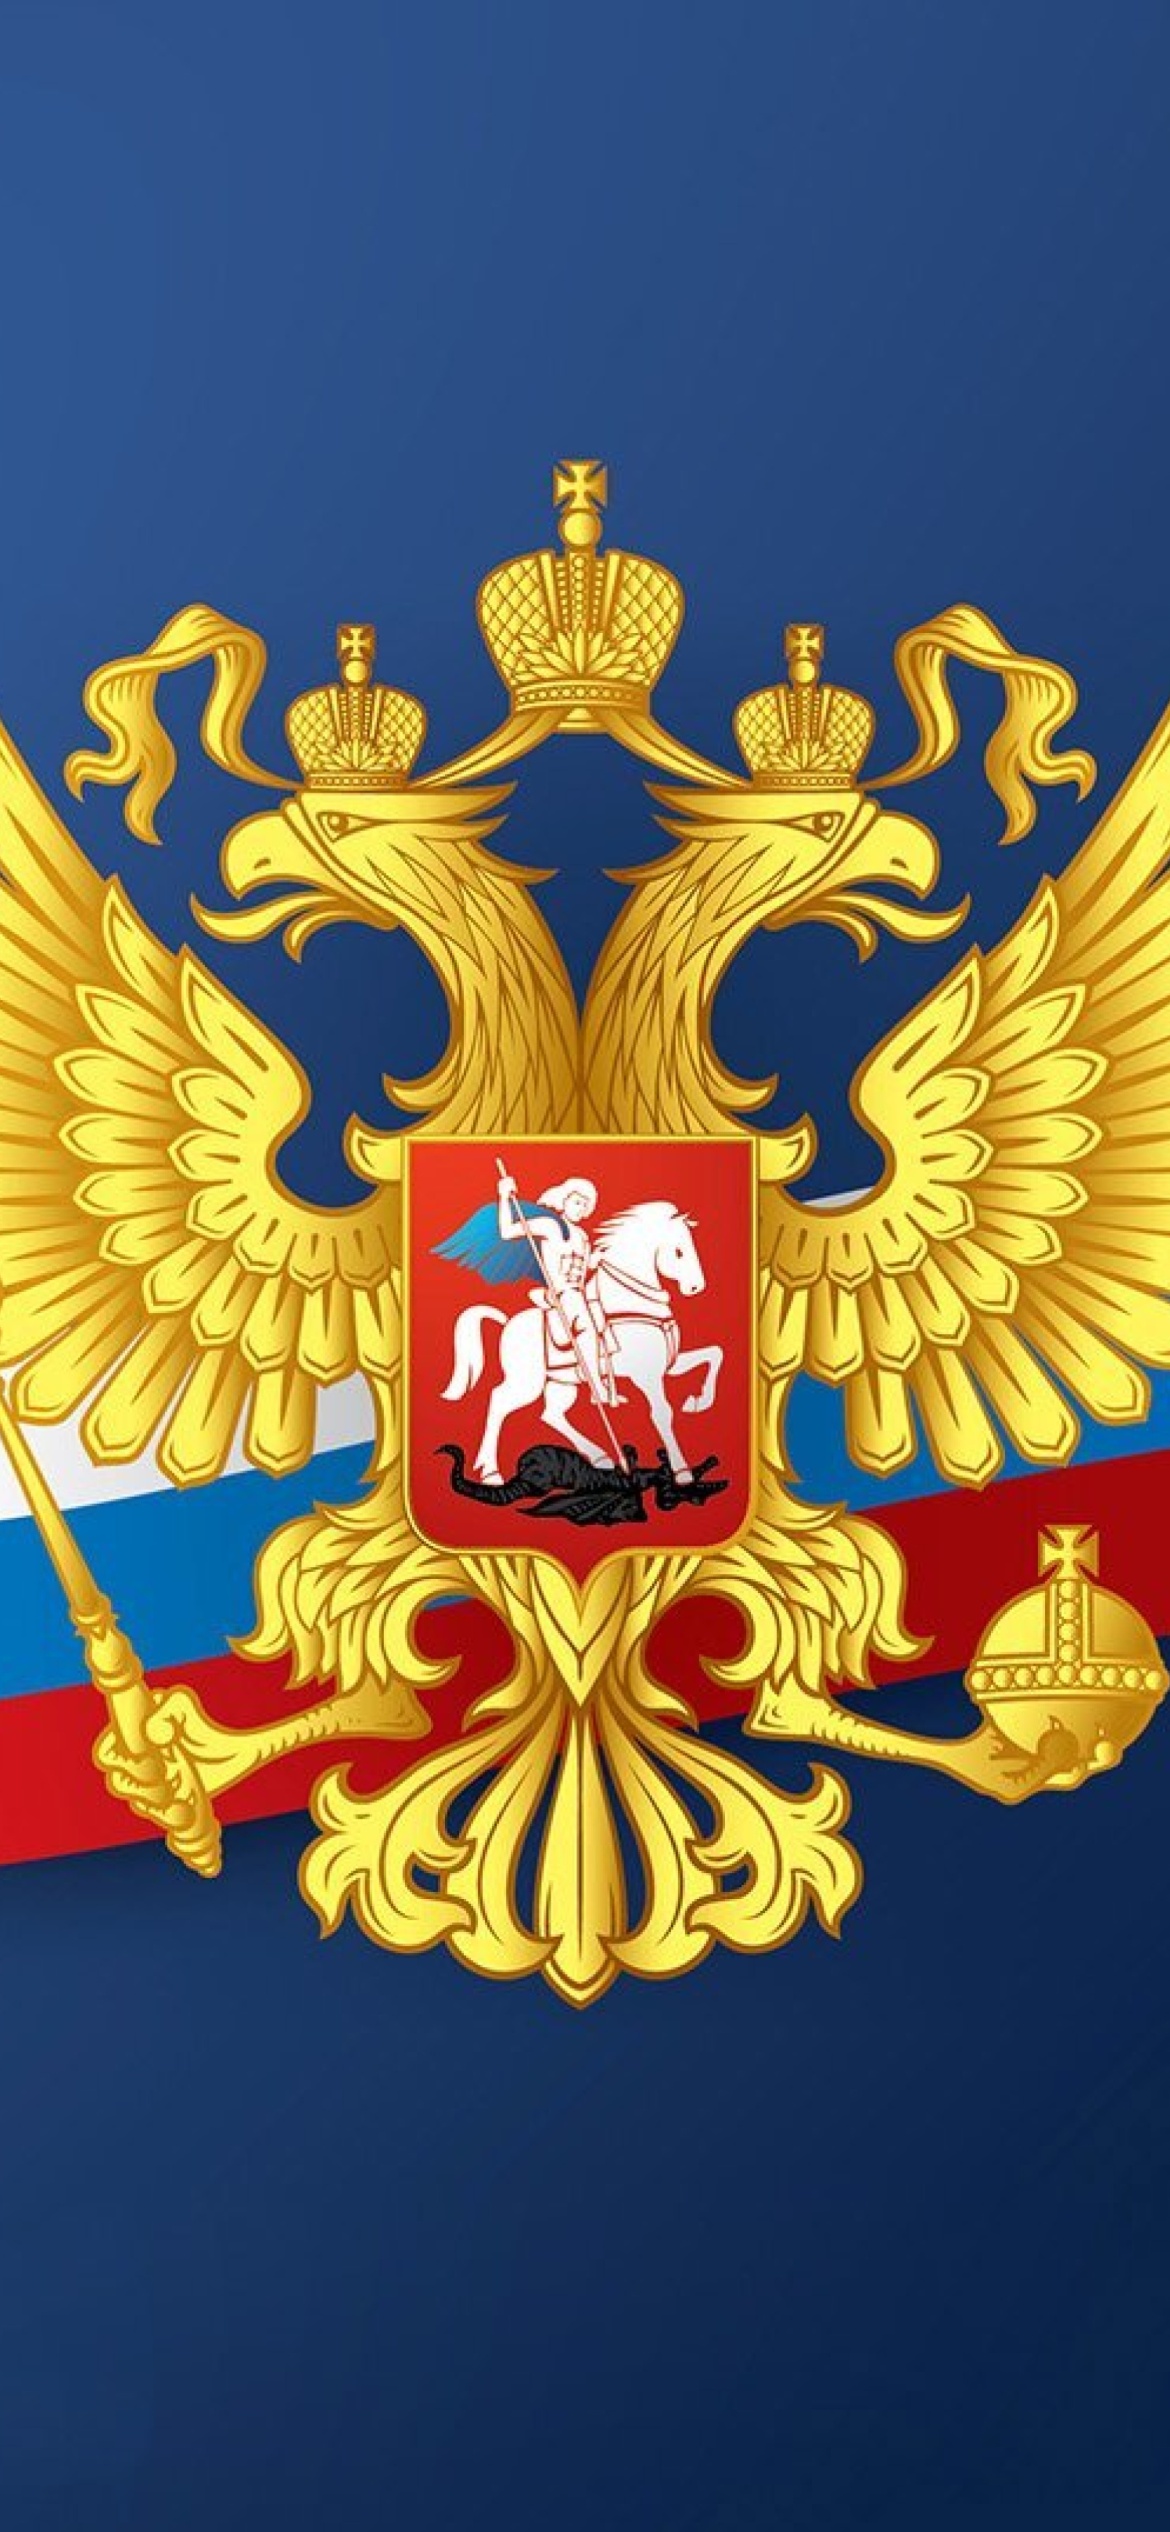 Russian coat of arms and flag screenshot #1 1170x2532